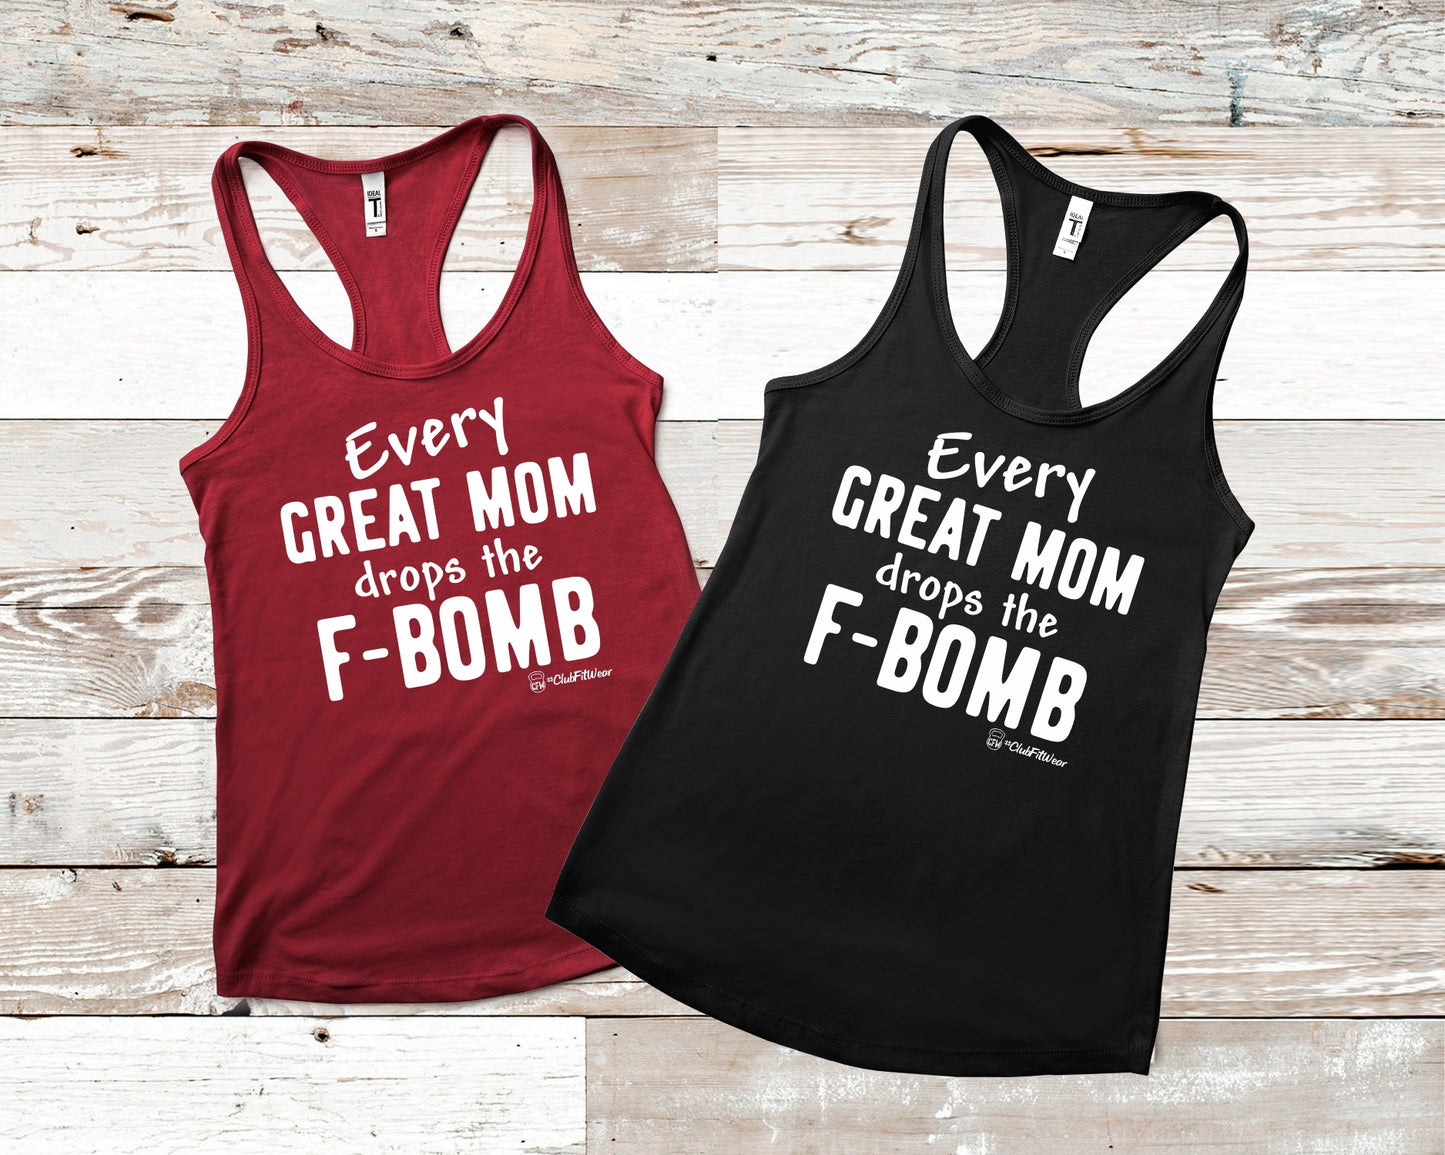 Every Great Mom Drops the F-Bomb